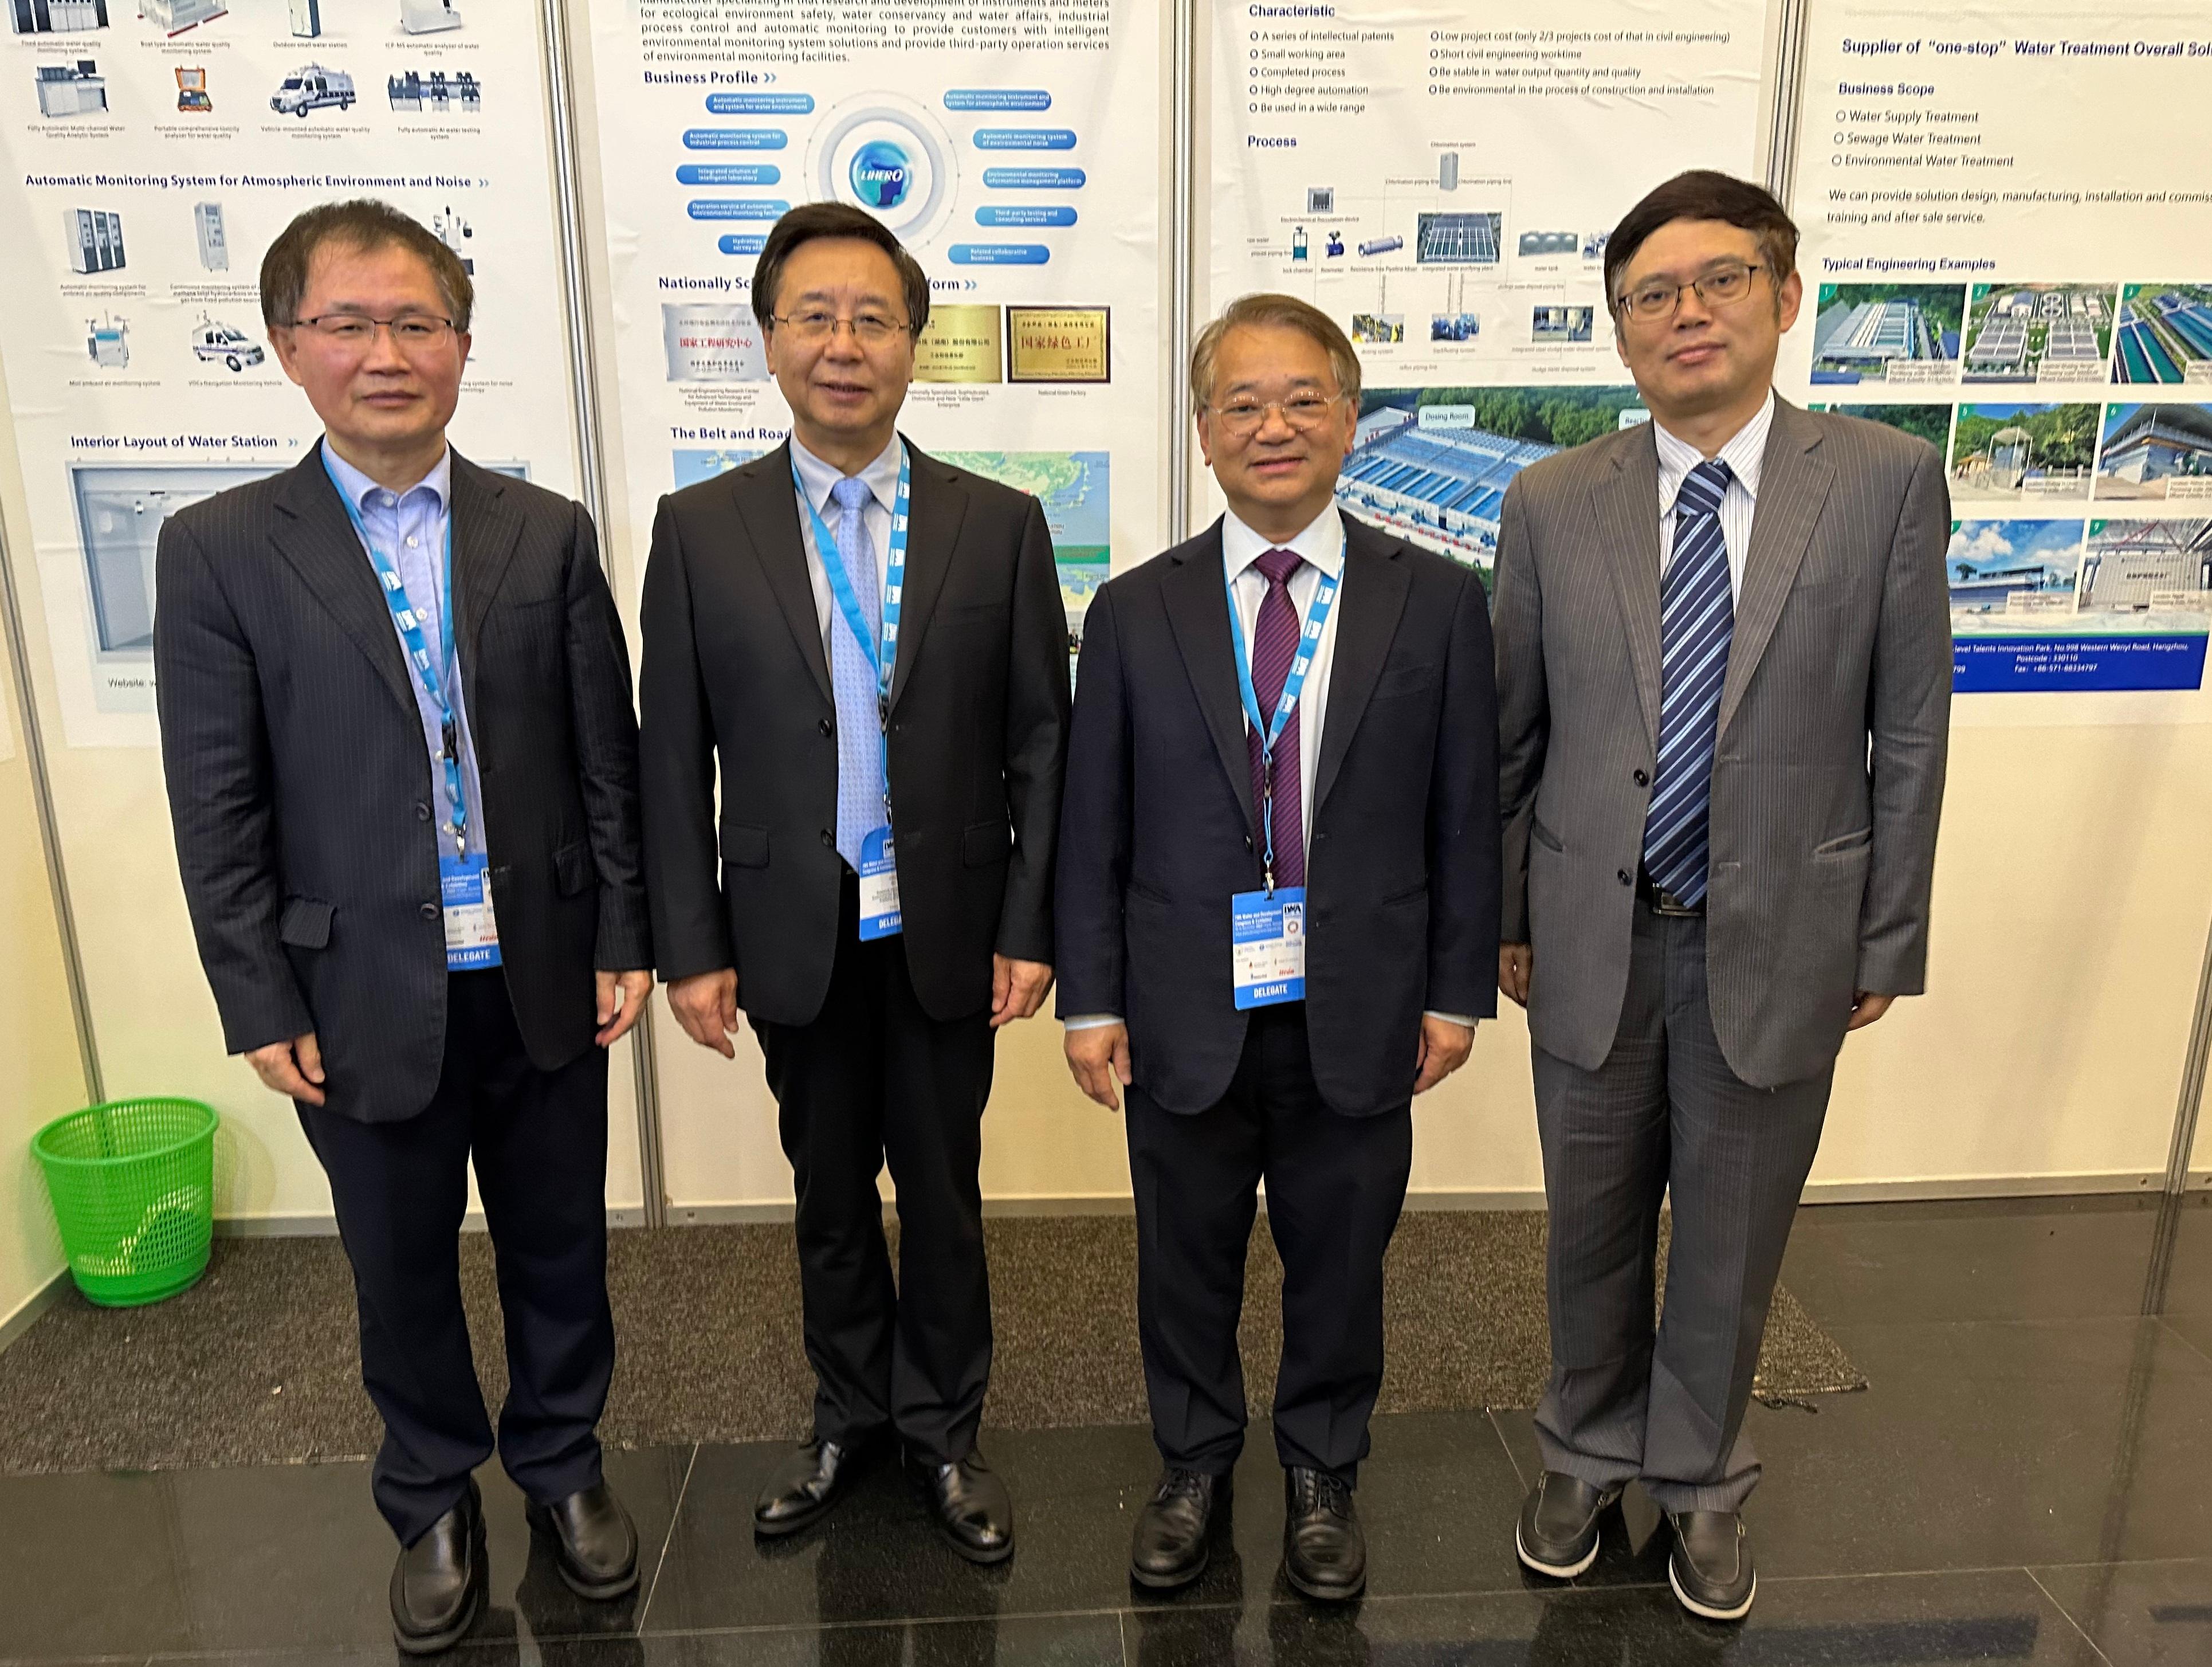 The Director of Environmental Protection, Dr Samuel Chui, attended the Water and Development Congress & Exhibition organised by the International Water Association, and an international workshop as invited by the Research Center for Eco-Environmental Sciences (RCEES) of the Chinese Academy of Sciences (CAS) in Rwanda, Africa, on December 13 and 14. Photo shows Dr Chui (second right) with Professor Qu Jiuhui (second left) from the RCEES of the CAS, Professor Yang Min (first right) from the RCEES of the CAS and Professor Wu Qingping (first left) from the Institute of Microbiology, Guangdong Academy of Sciences.